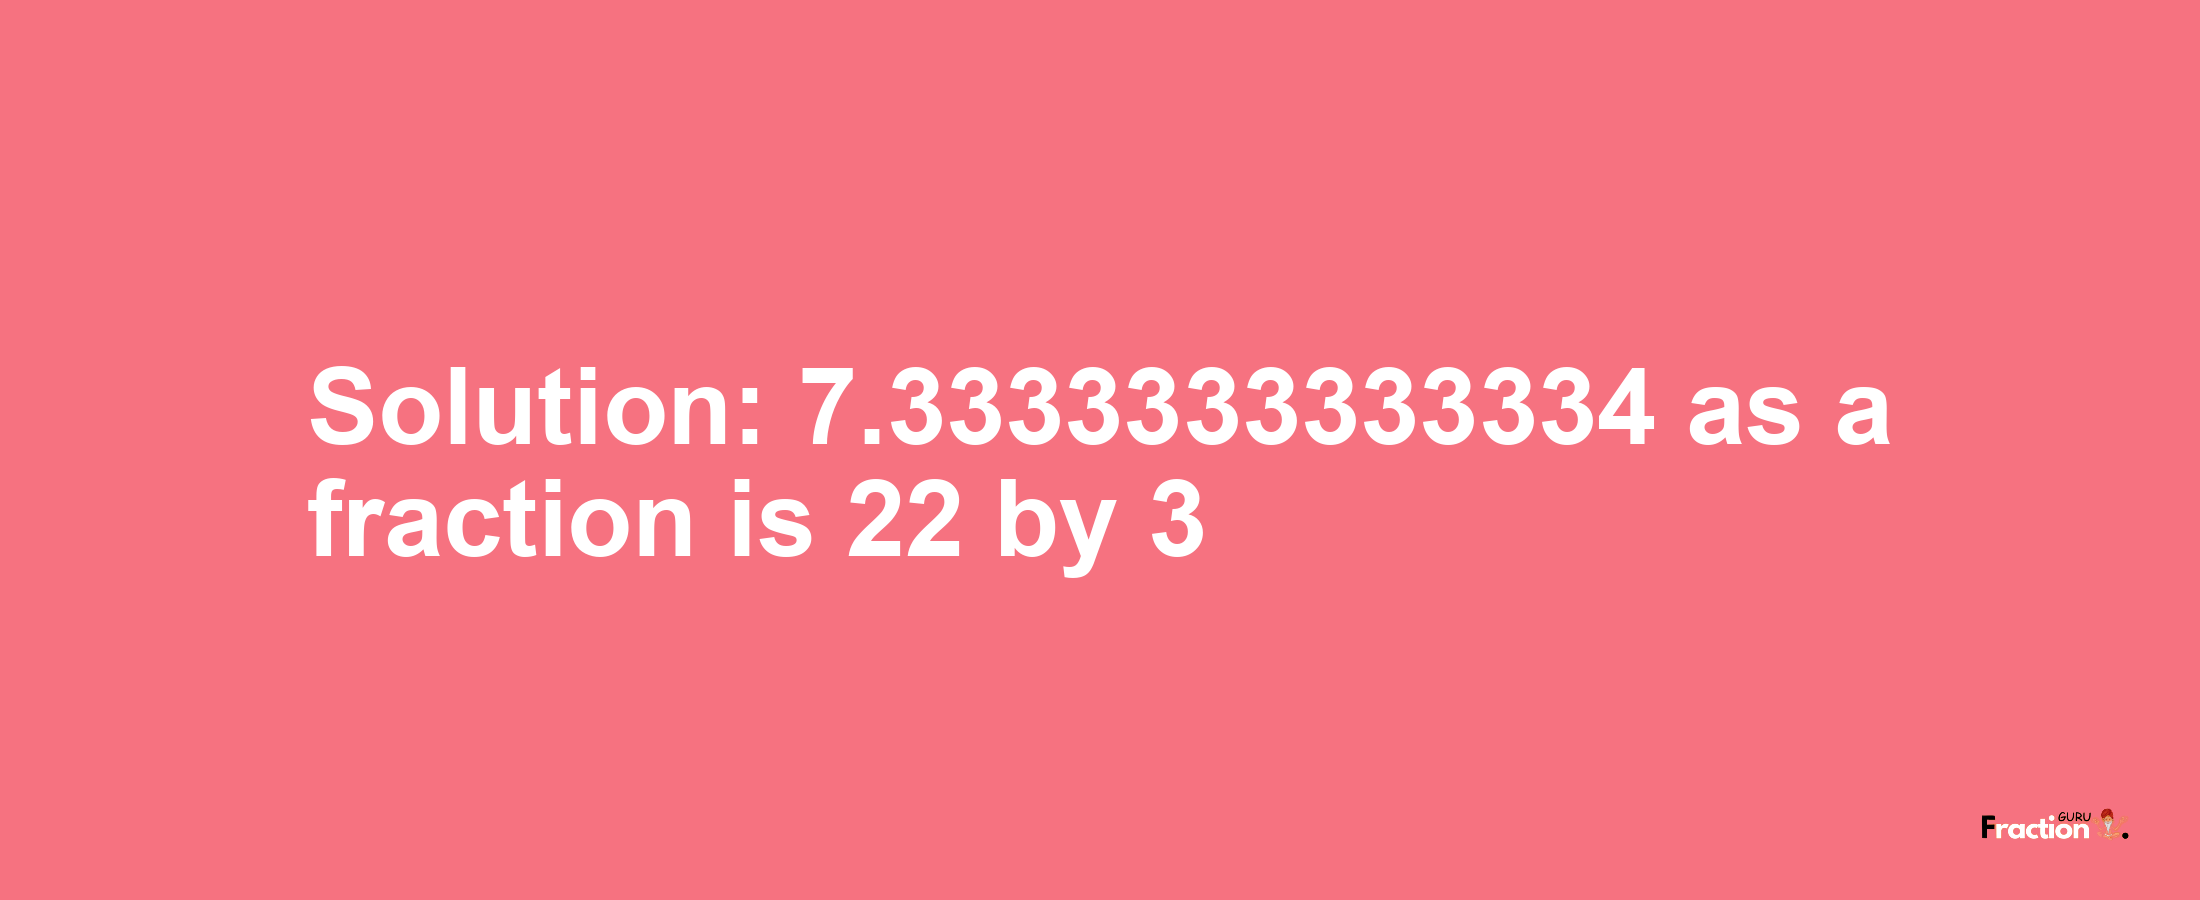 Solution:7.3333333333334 as a fraction is 22/3